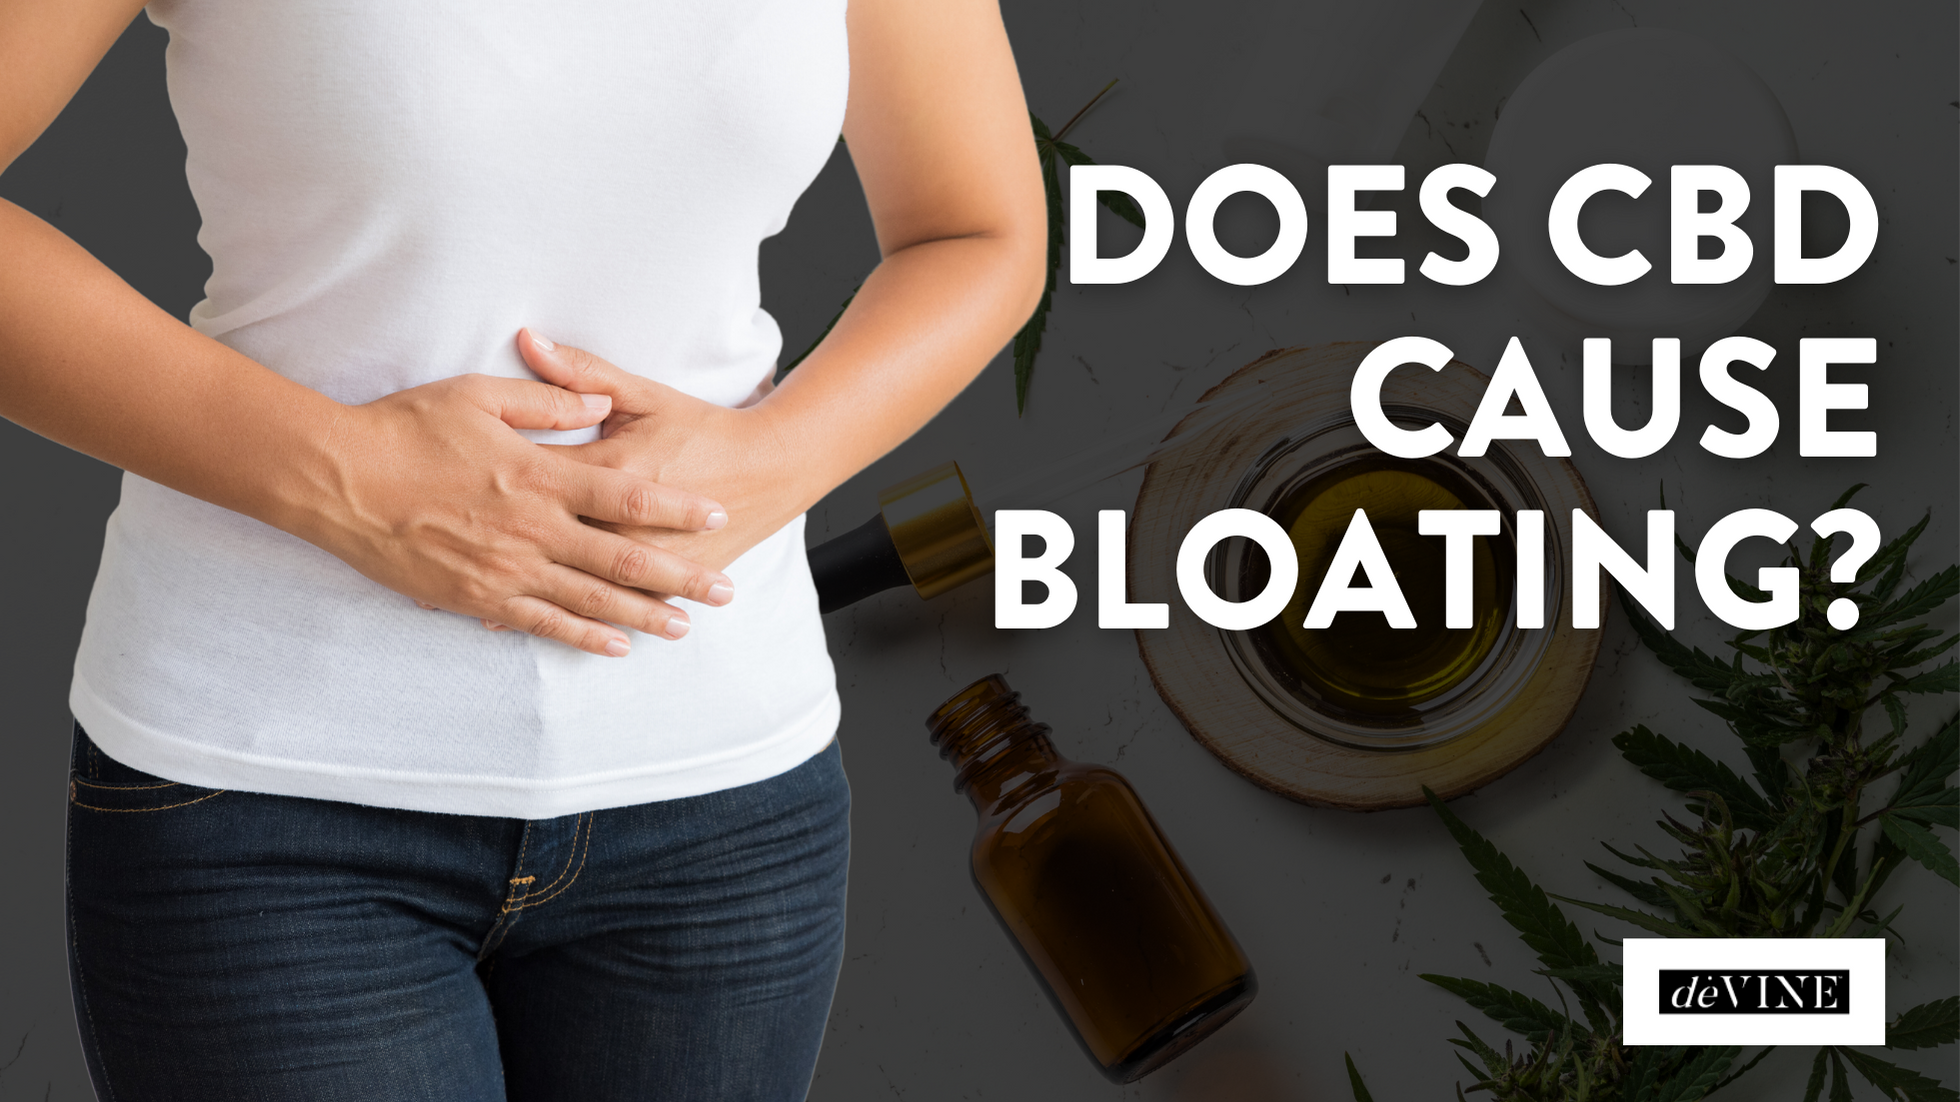 Does CBD Cause Bloating?